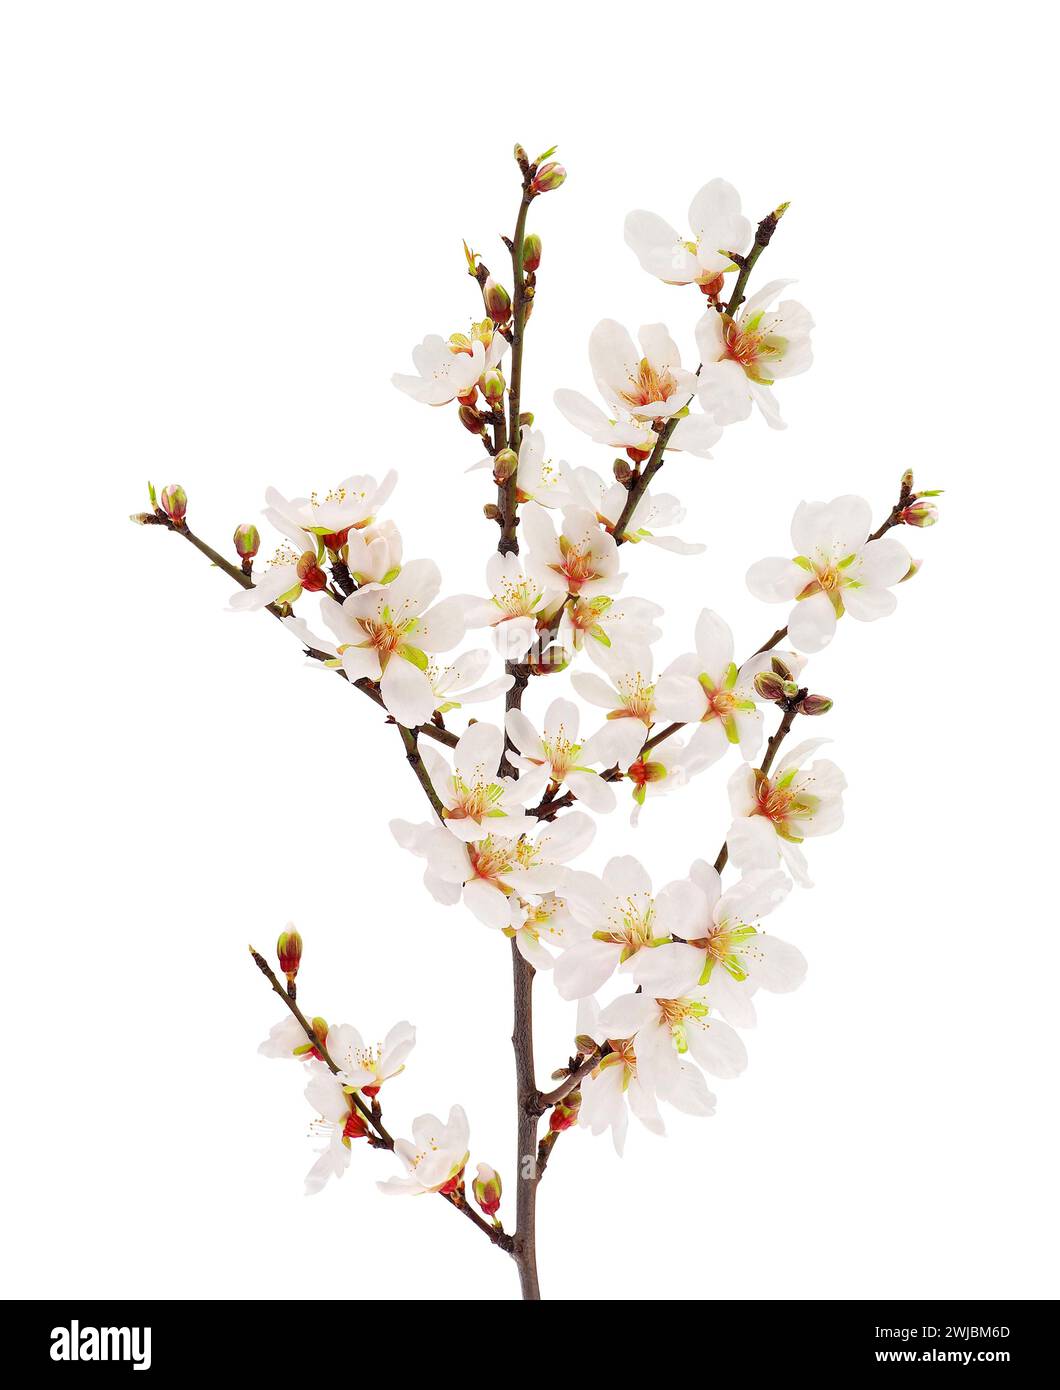 Blossoming almond tree branch isolated on white background, Prunus amygdalus Stock Photo